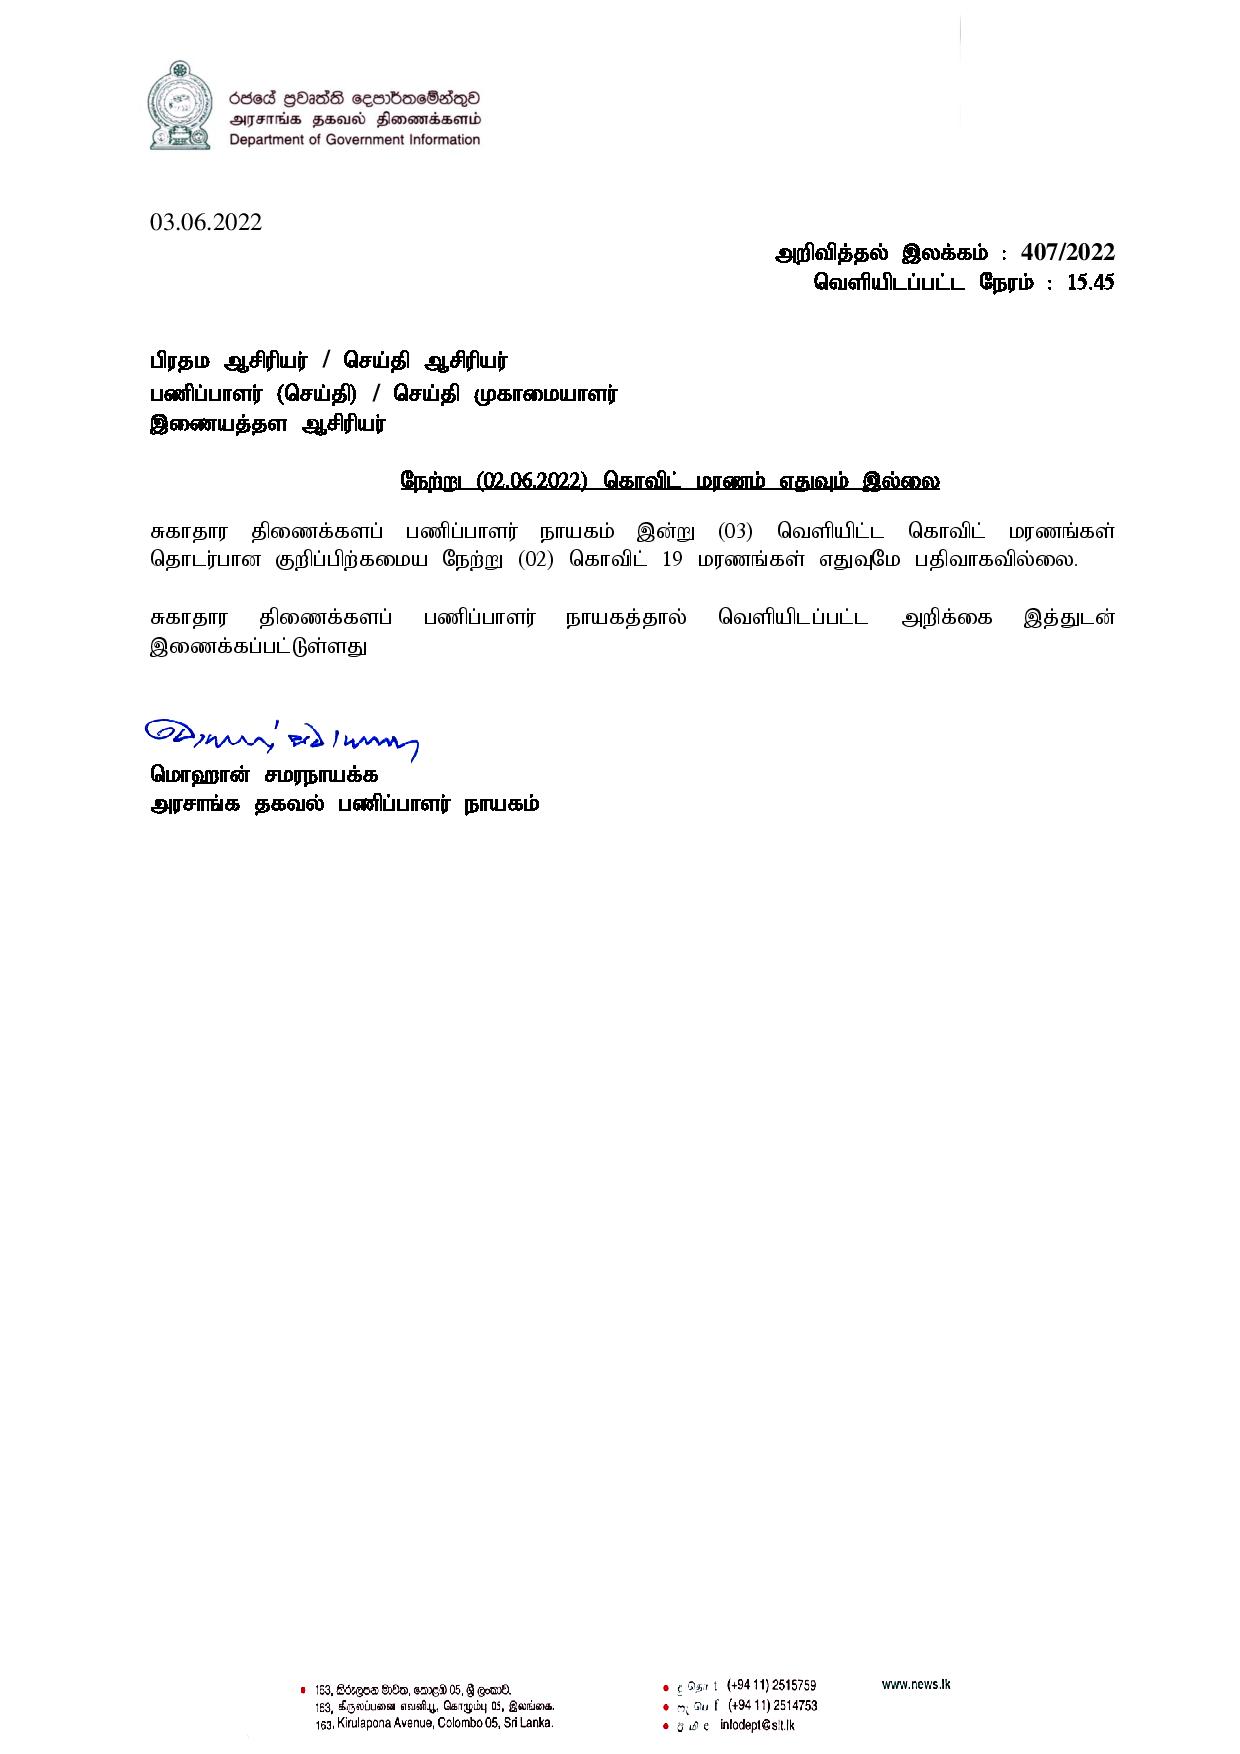 Release No 407 Tamil page 001